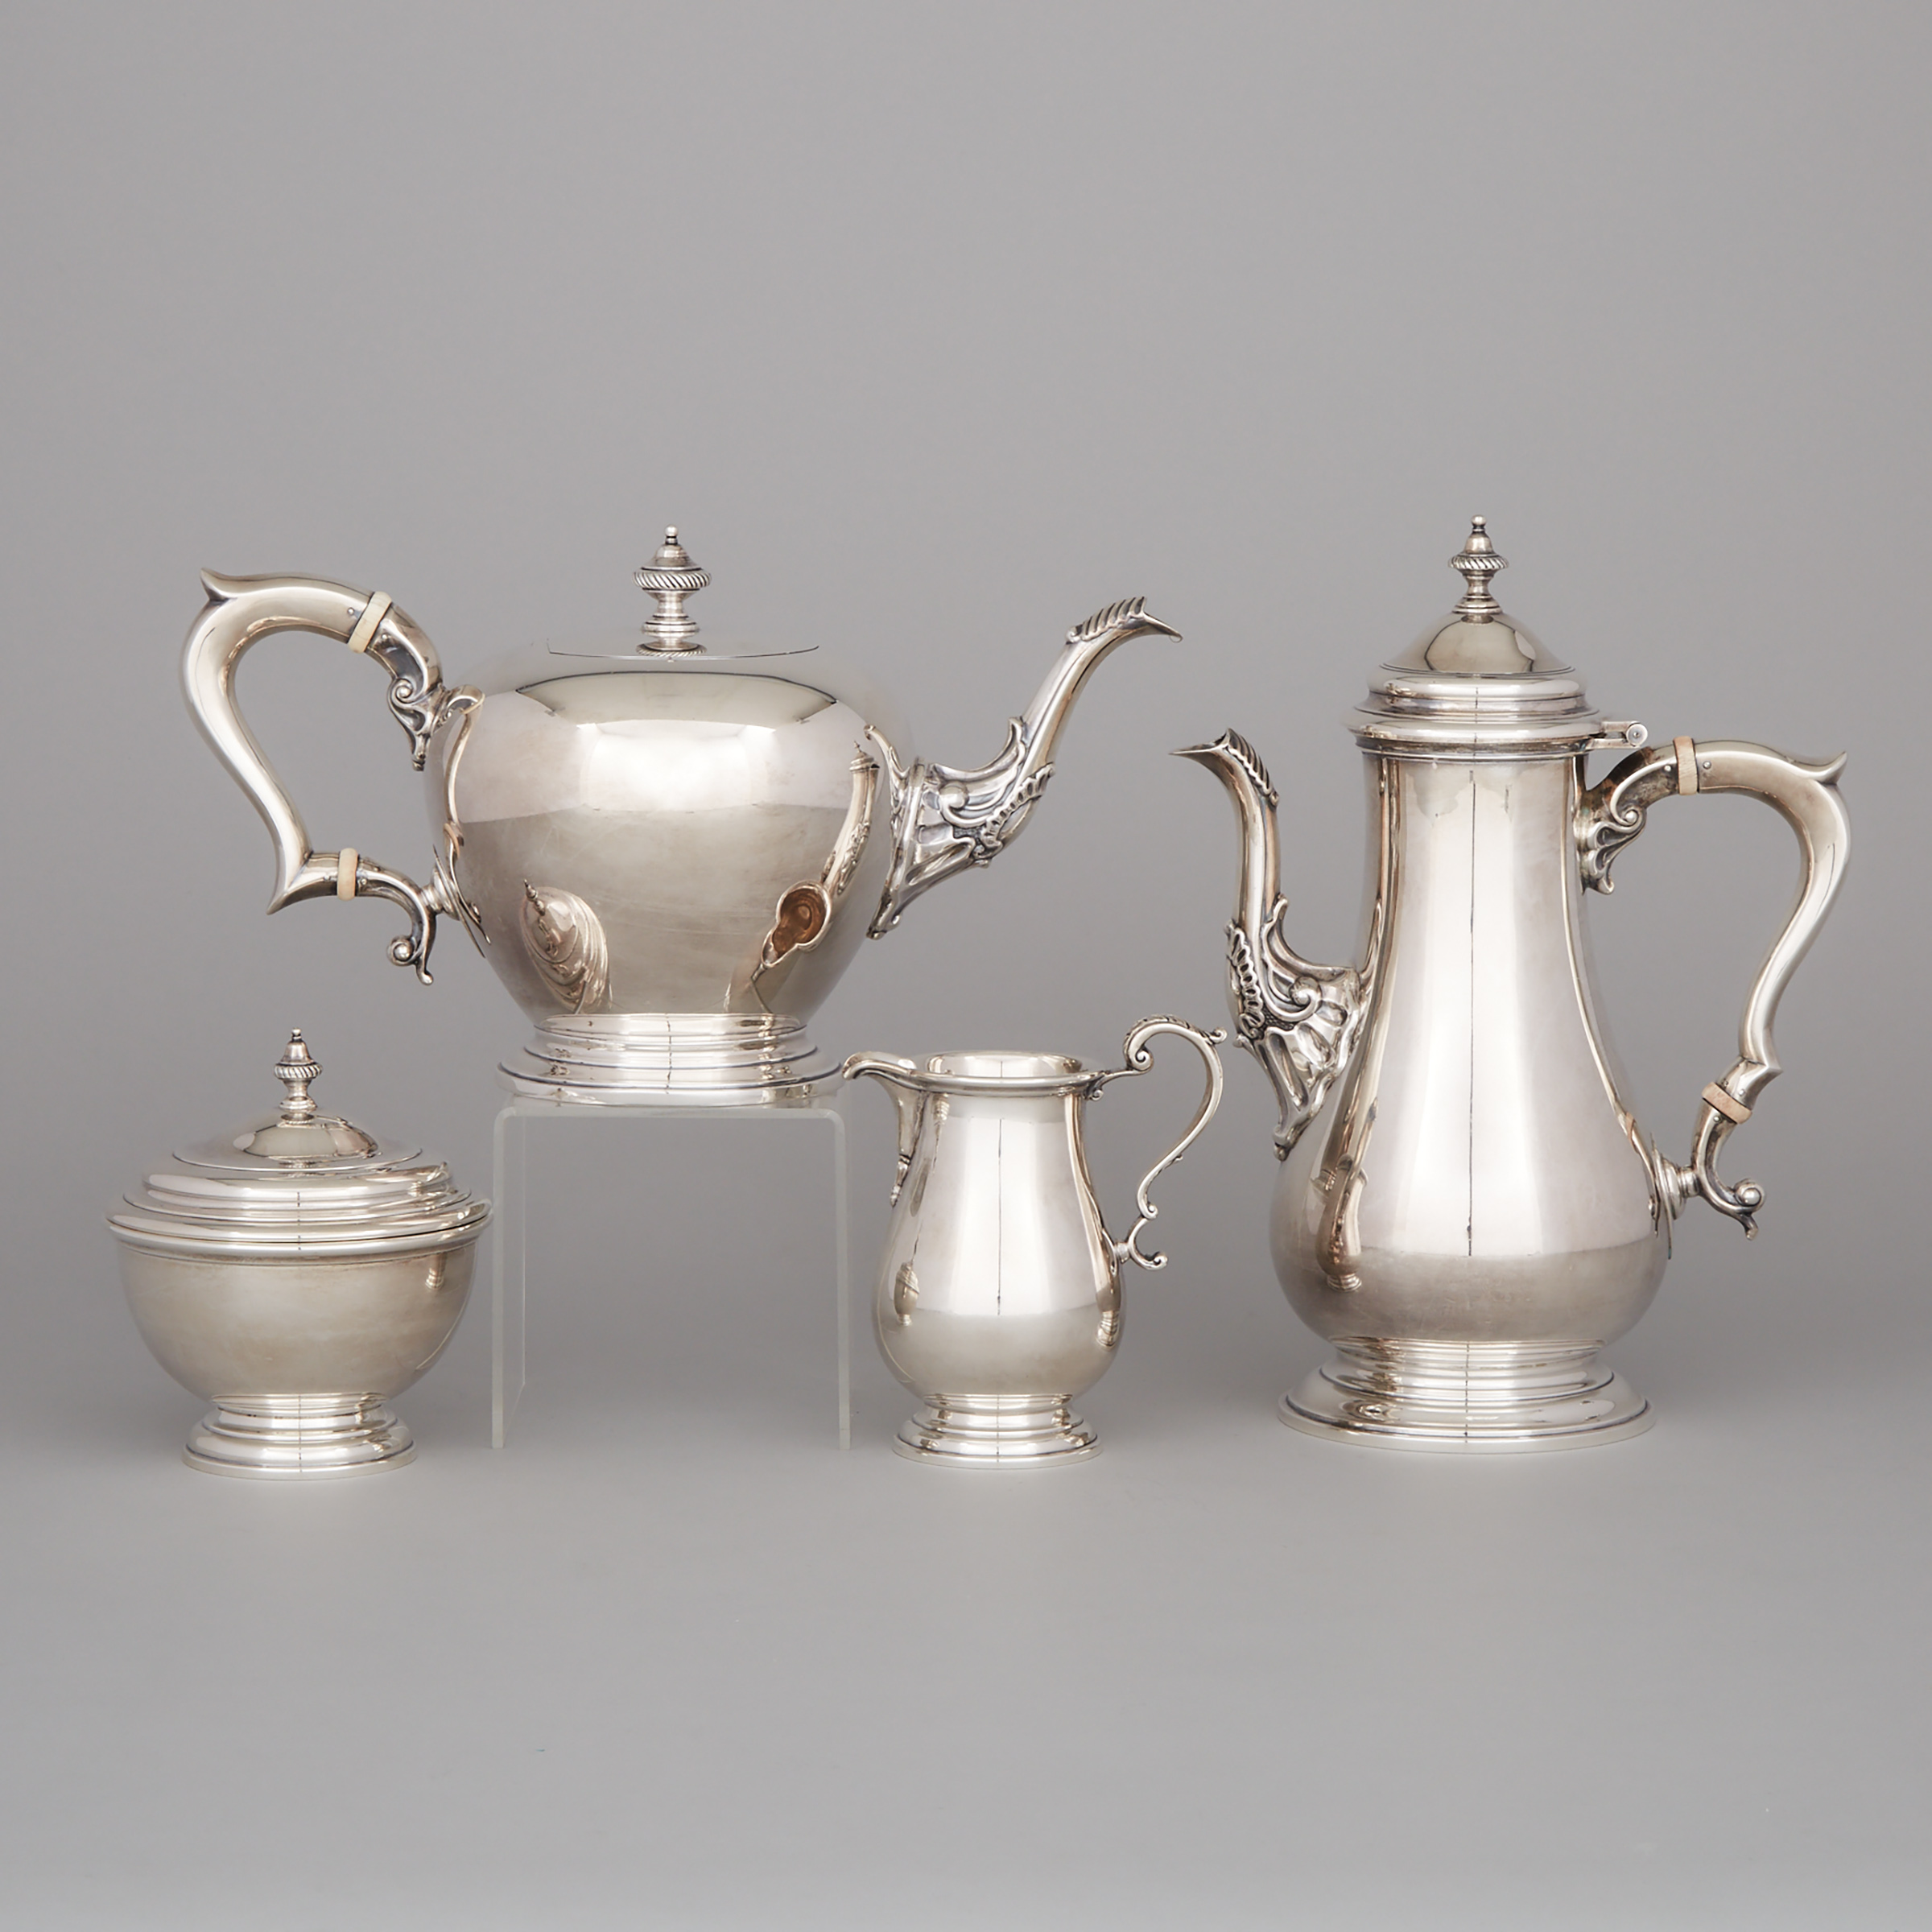 Canadian Silver Tea and Coffee Service, Henry Birks & Sons, Montreal, Que., 1963/64